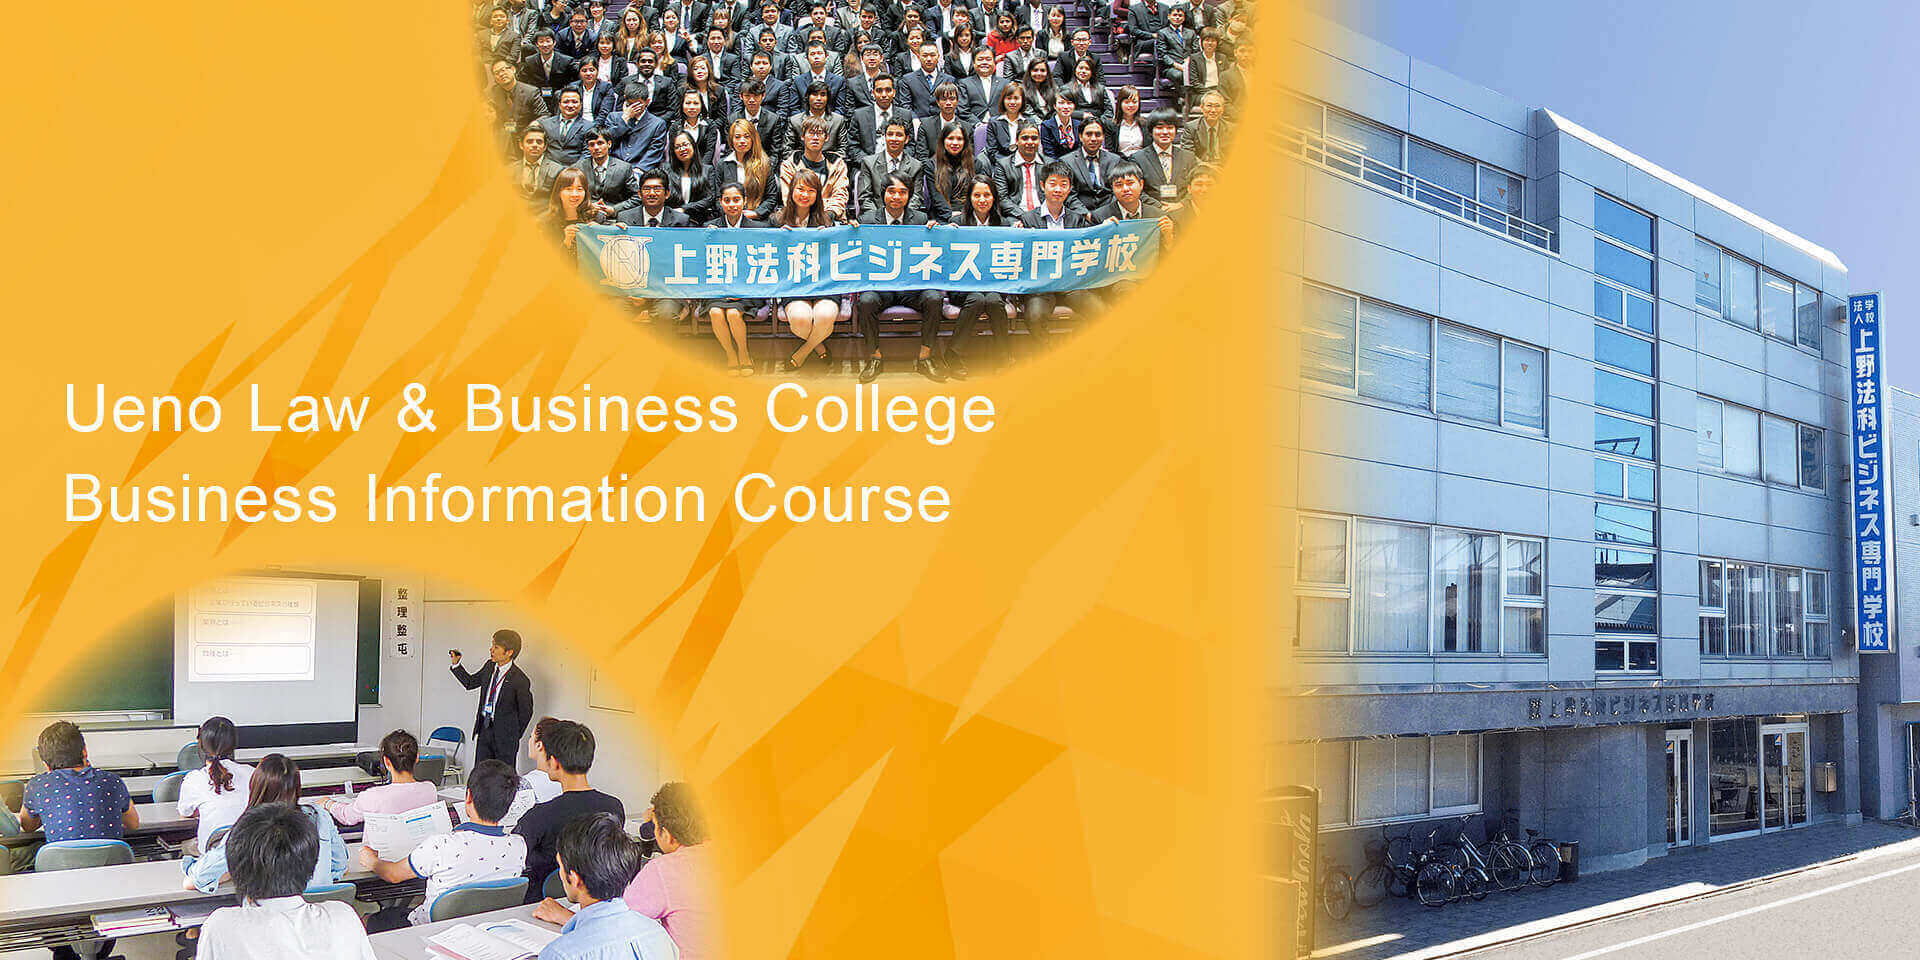 Ueno Law & Business College Business Information Course